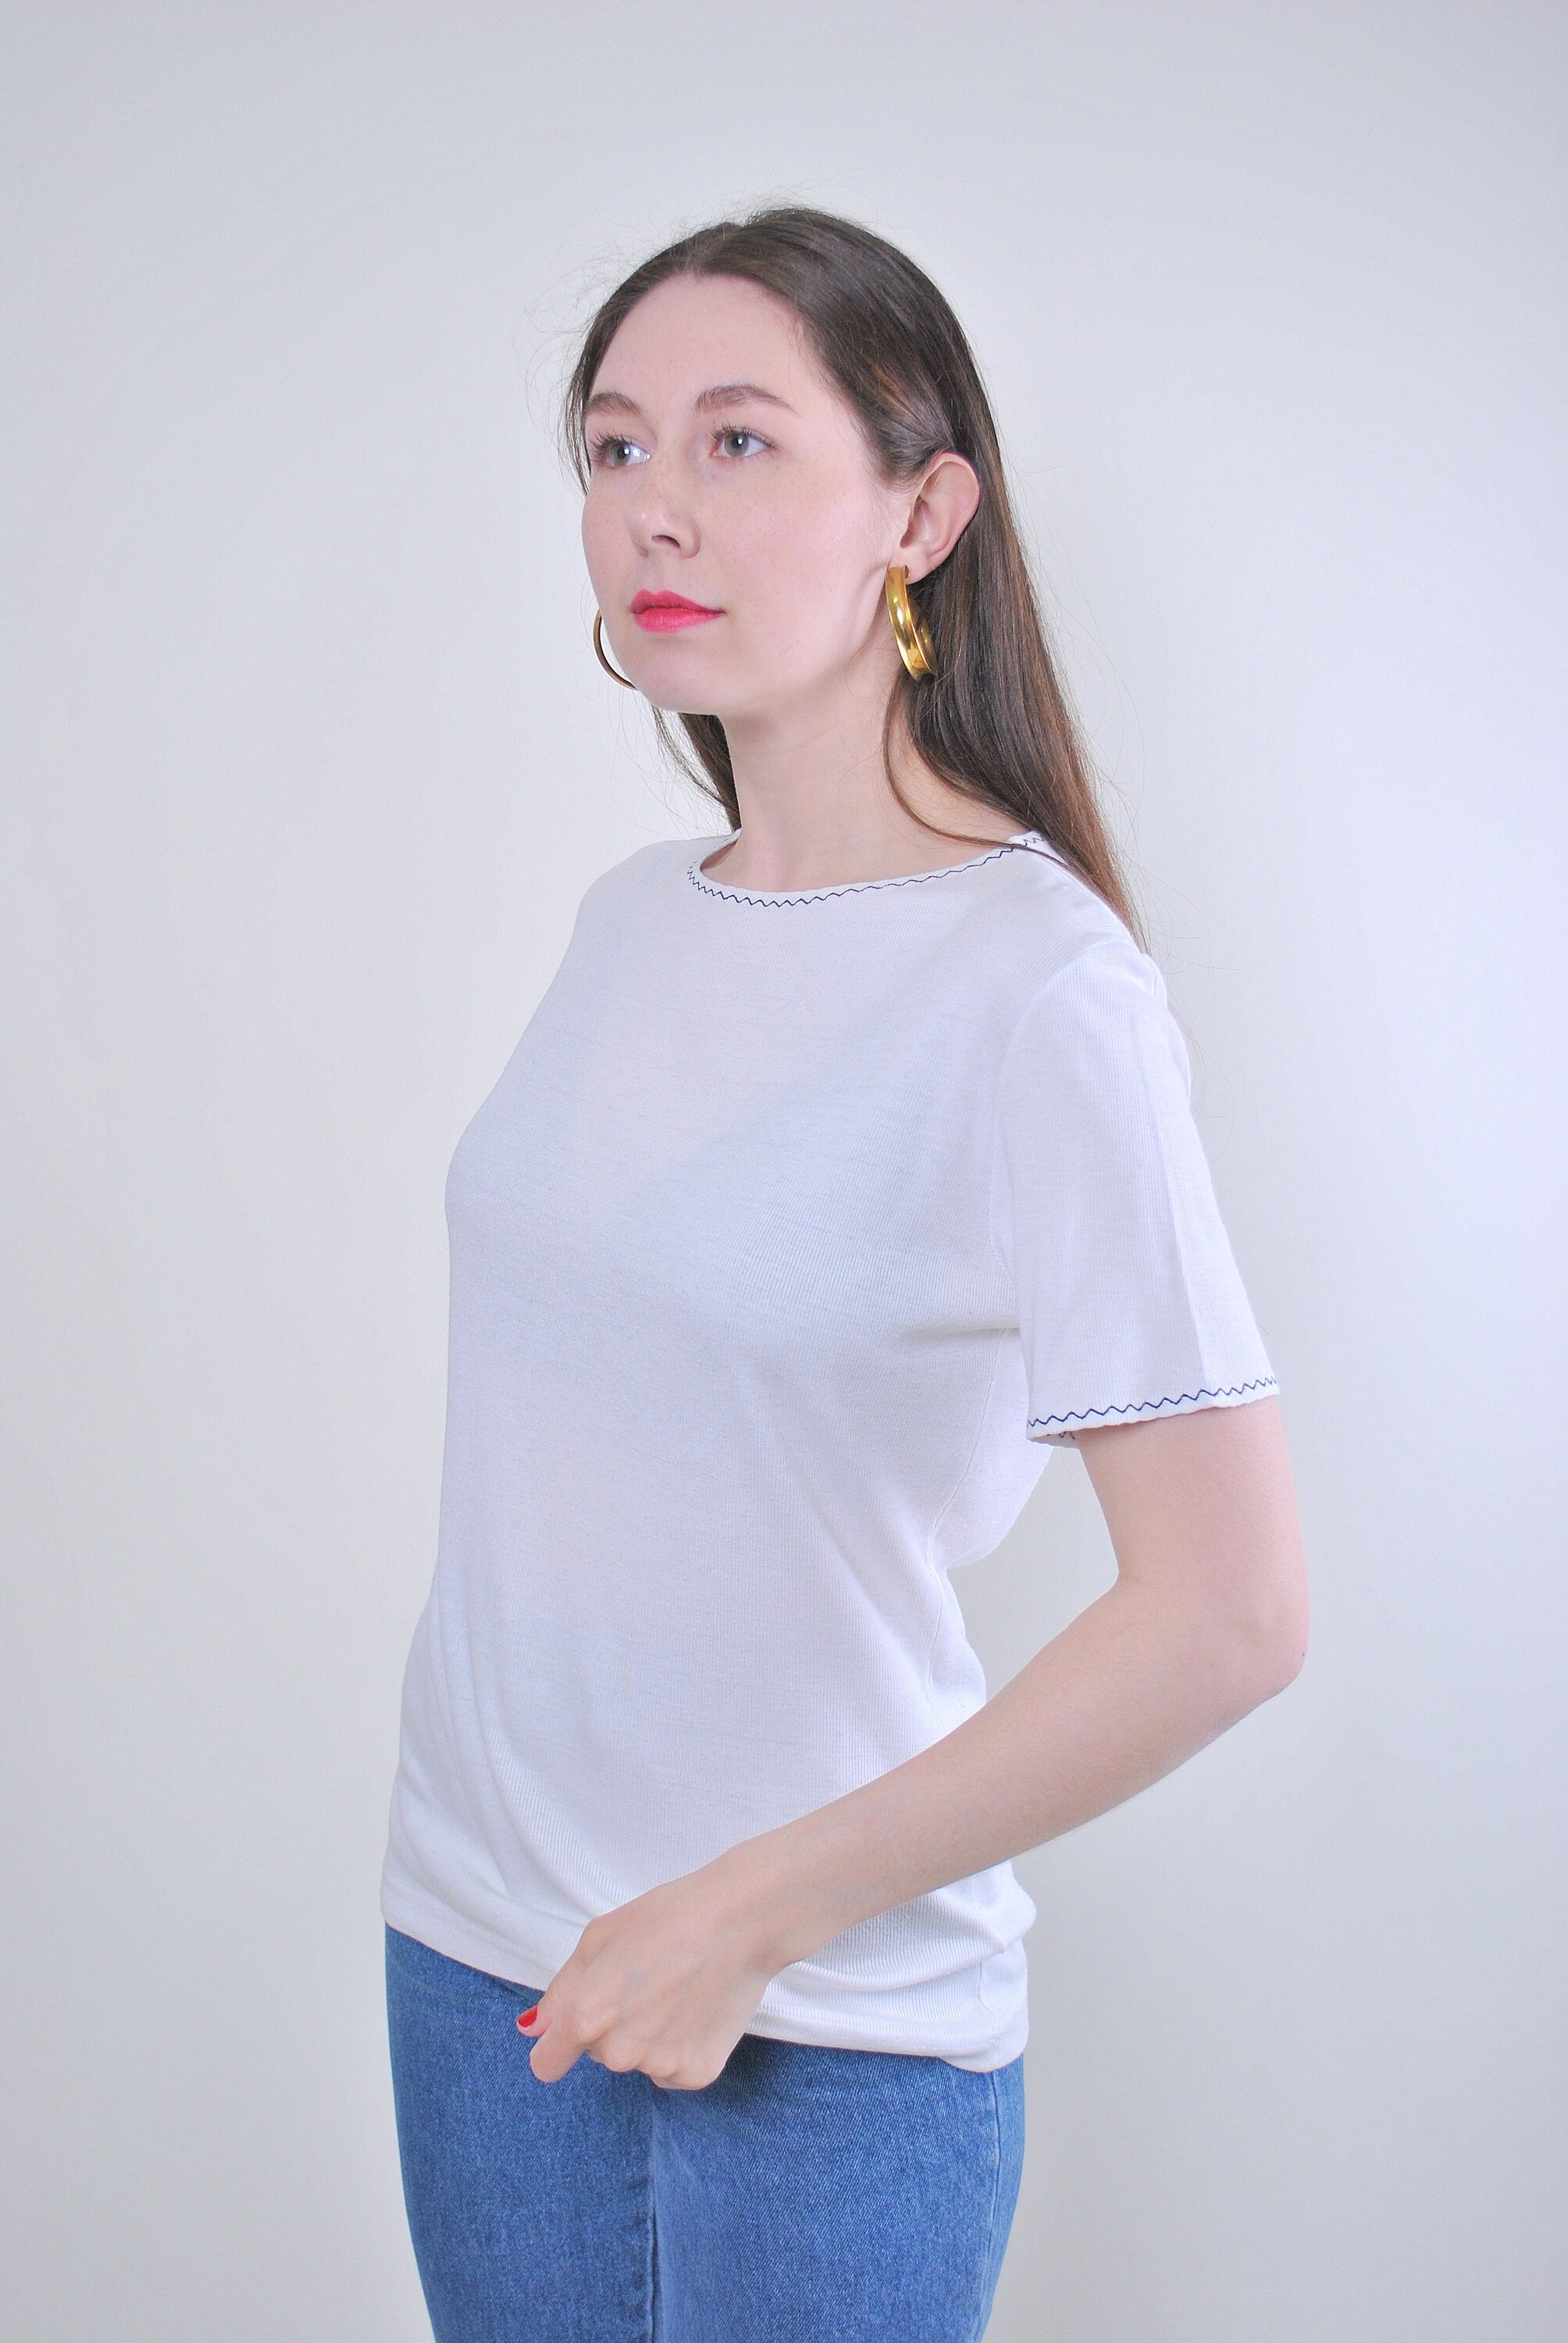 Retro White Minimalist Tshirt With Abstract Embroidery Size M - Etsy UK